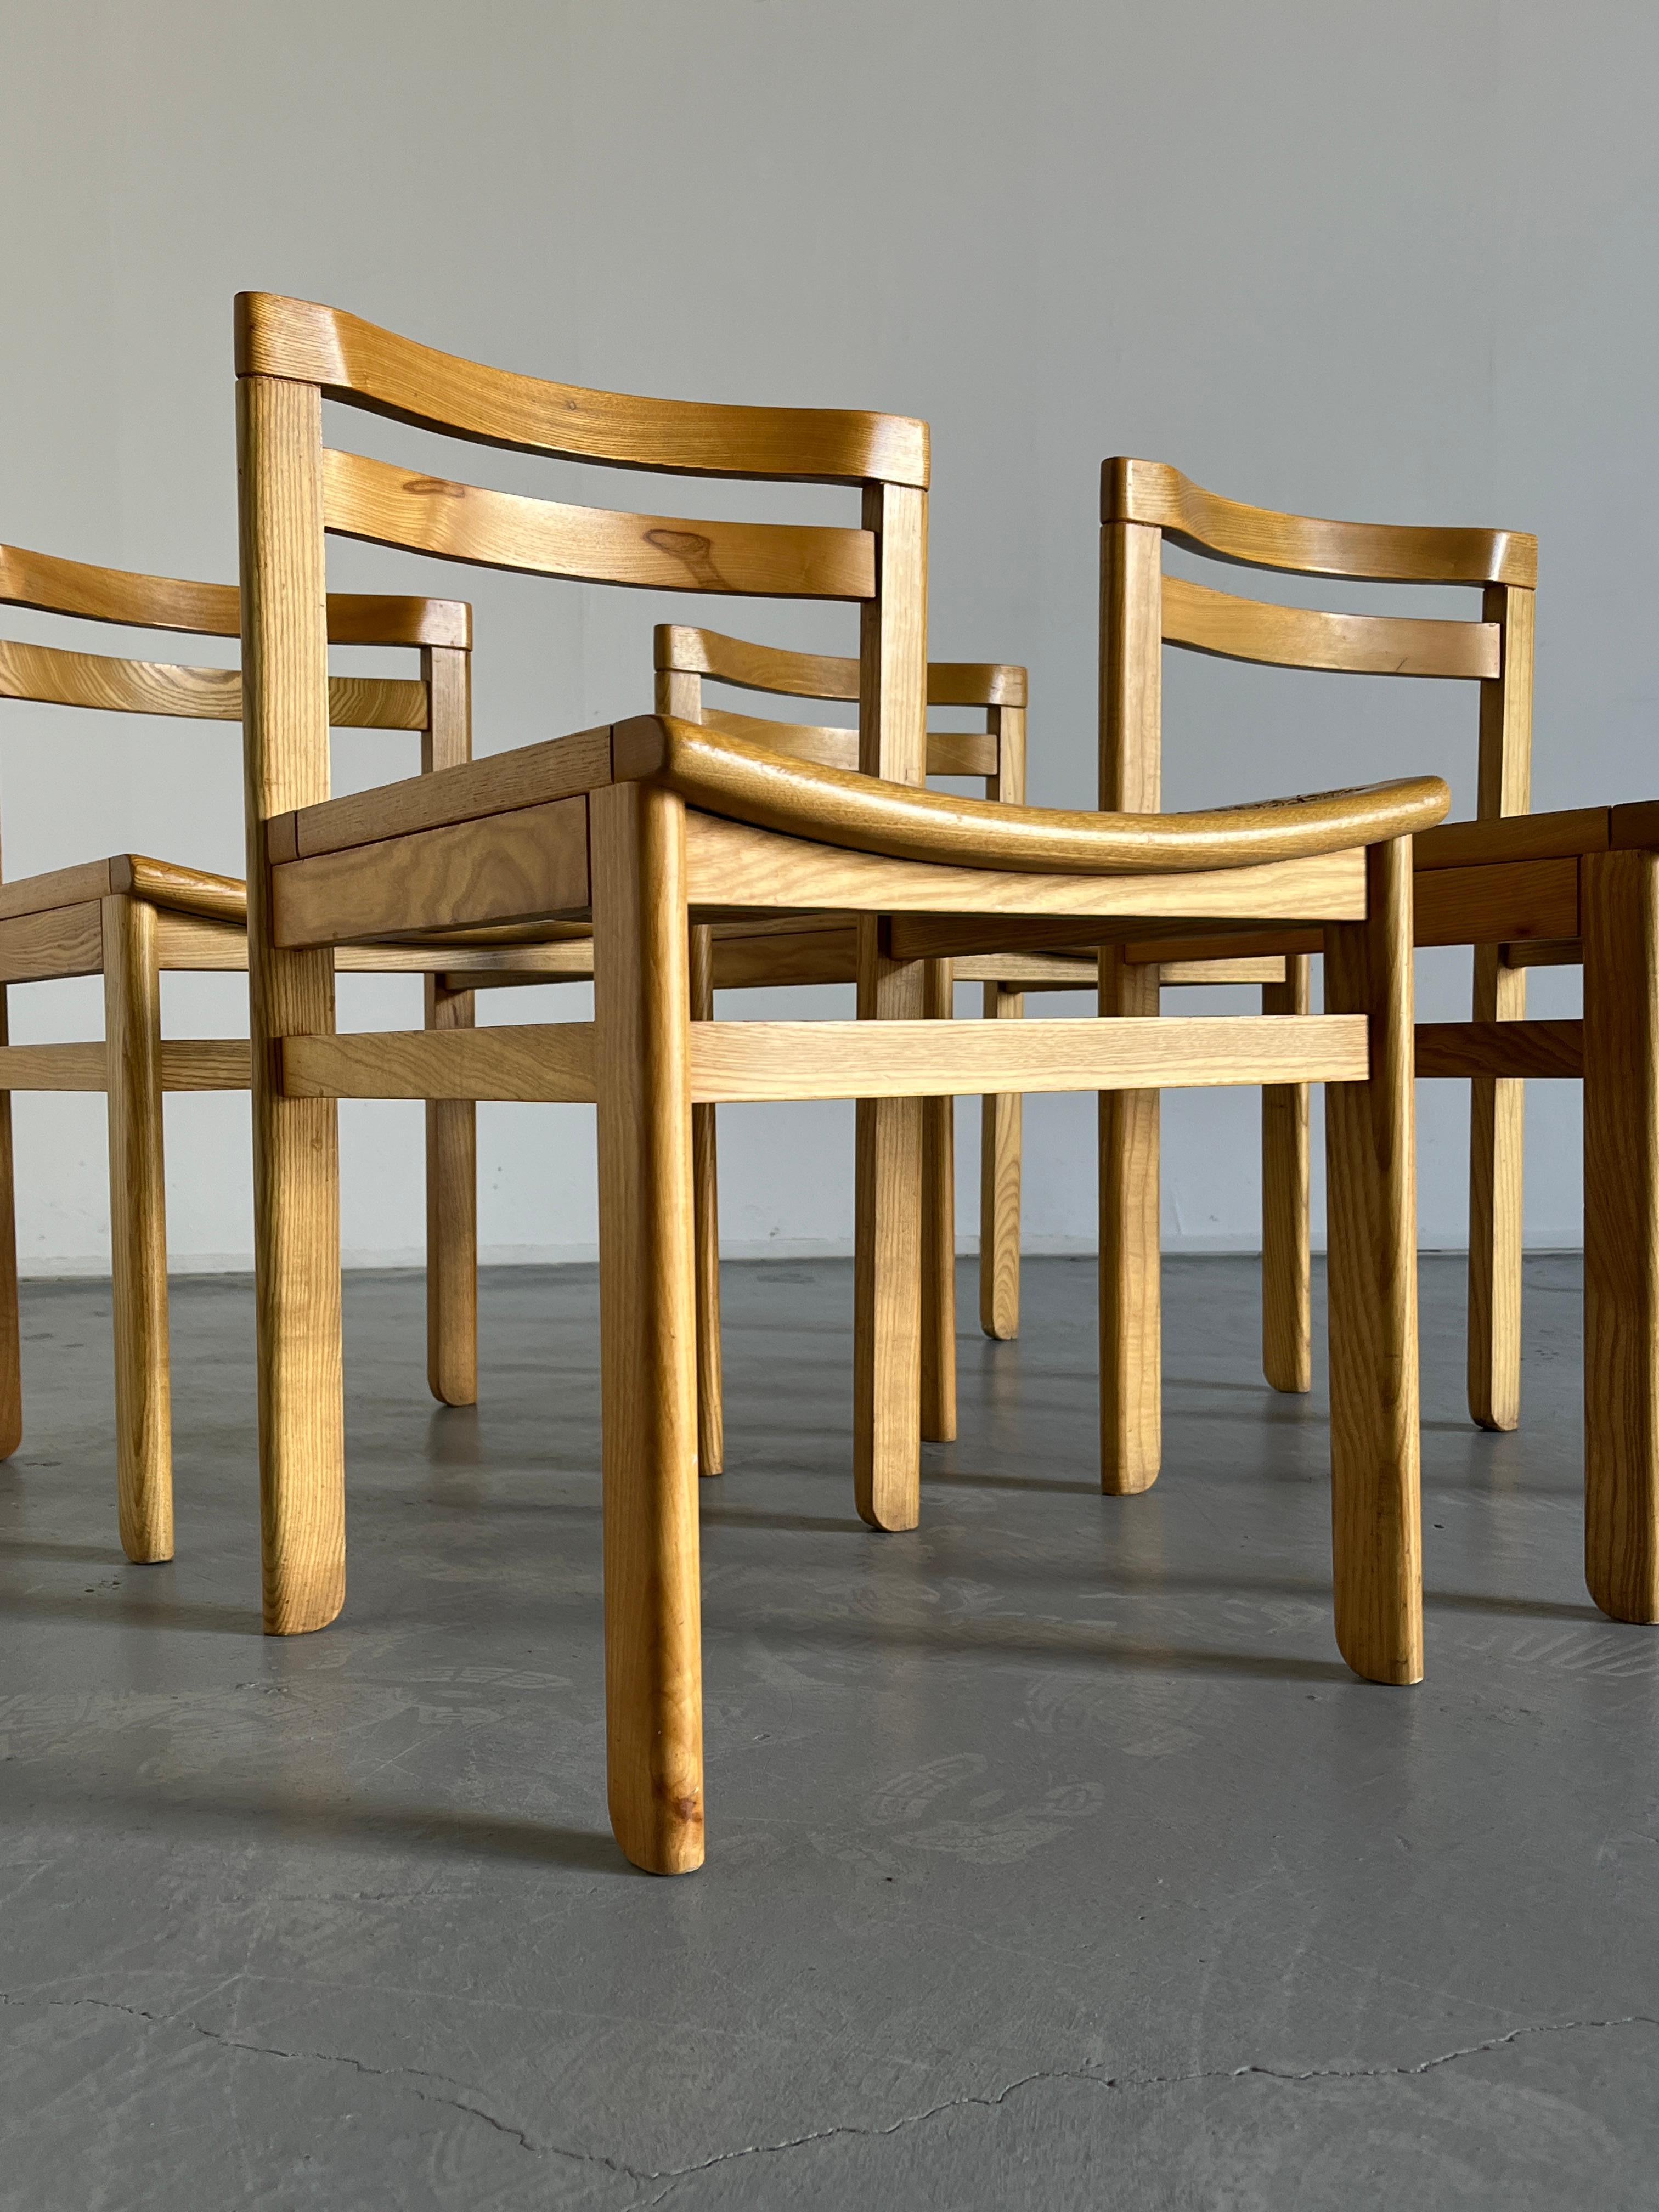 Set of 4 Mid-Century Modern Constructivist Wooden Dining Chairs in Beech, 1960s For Sale 3